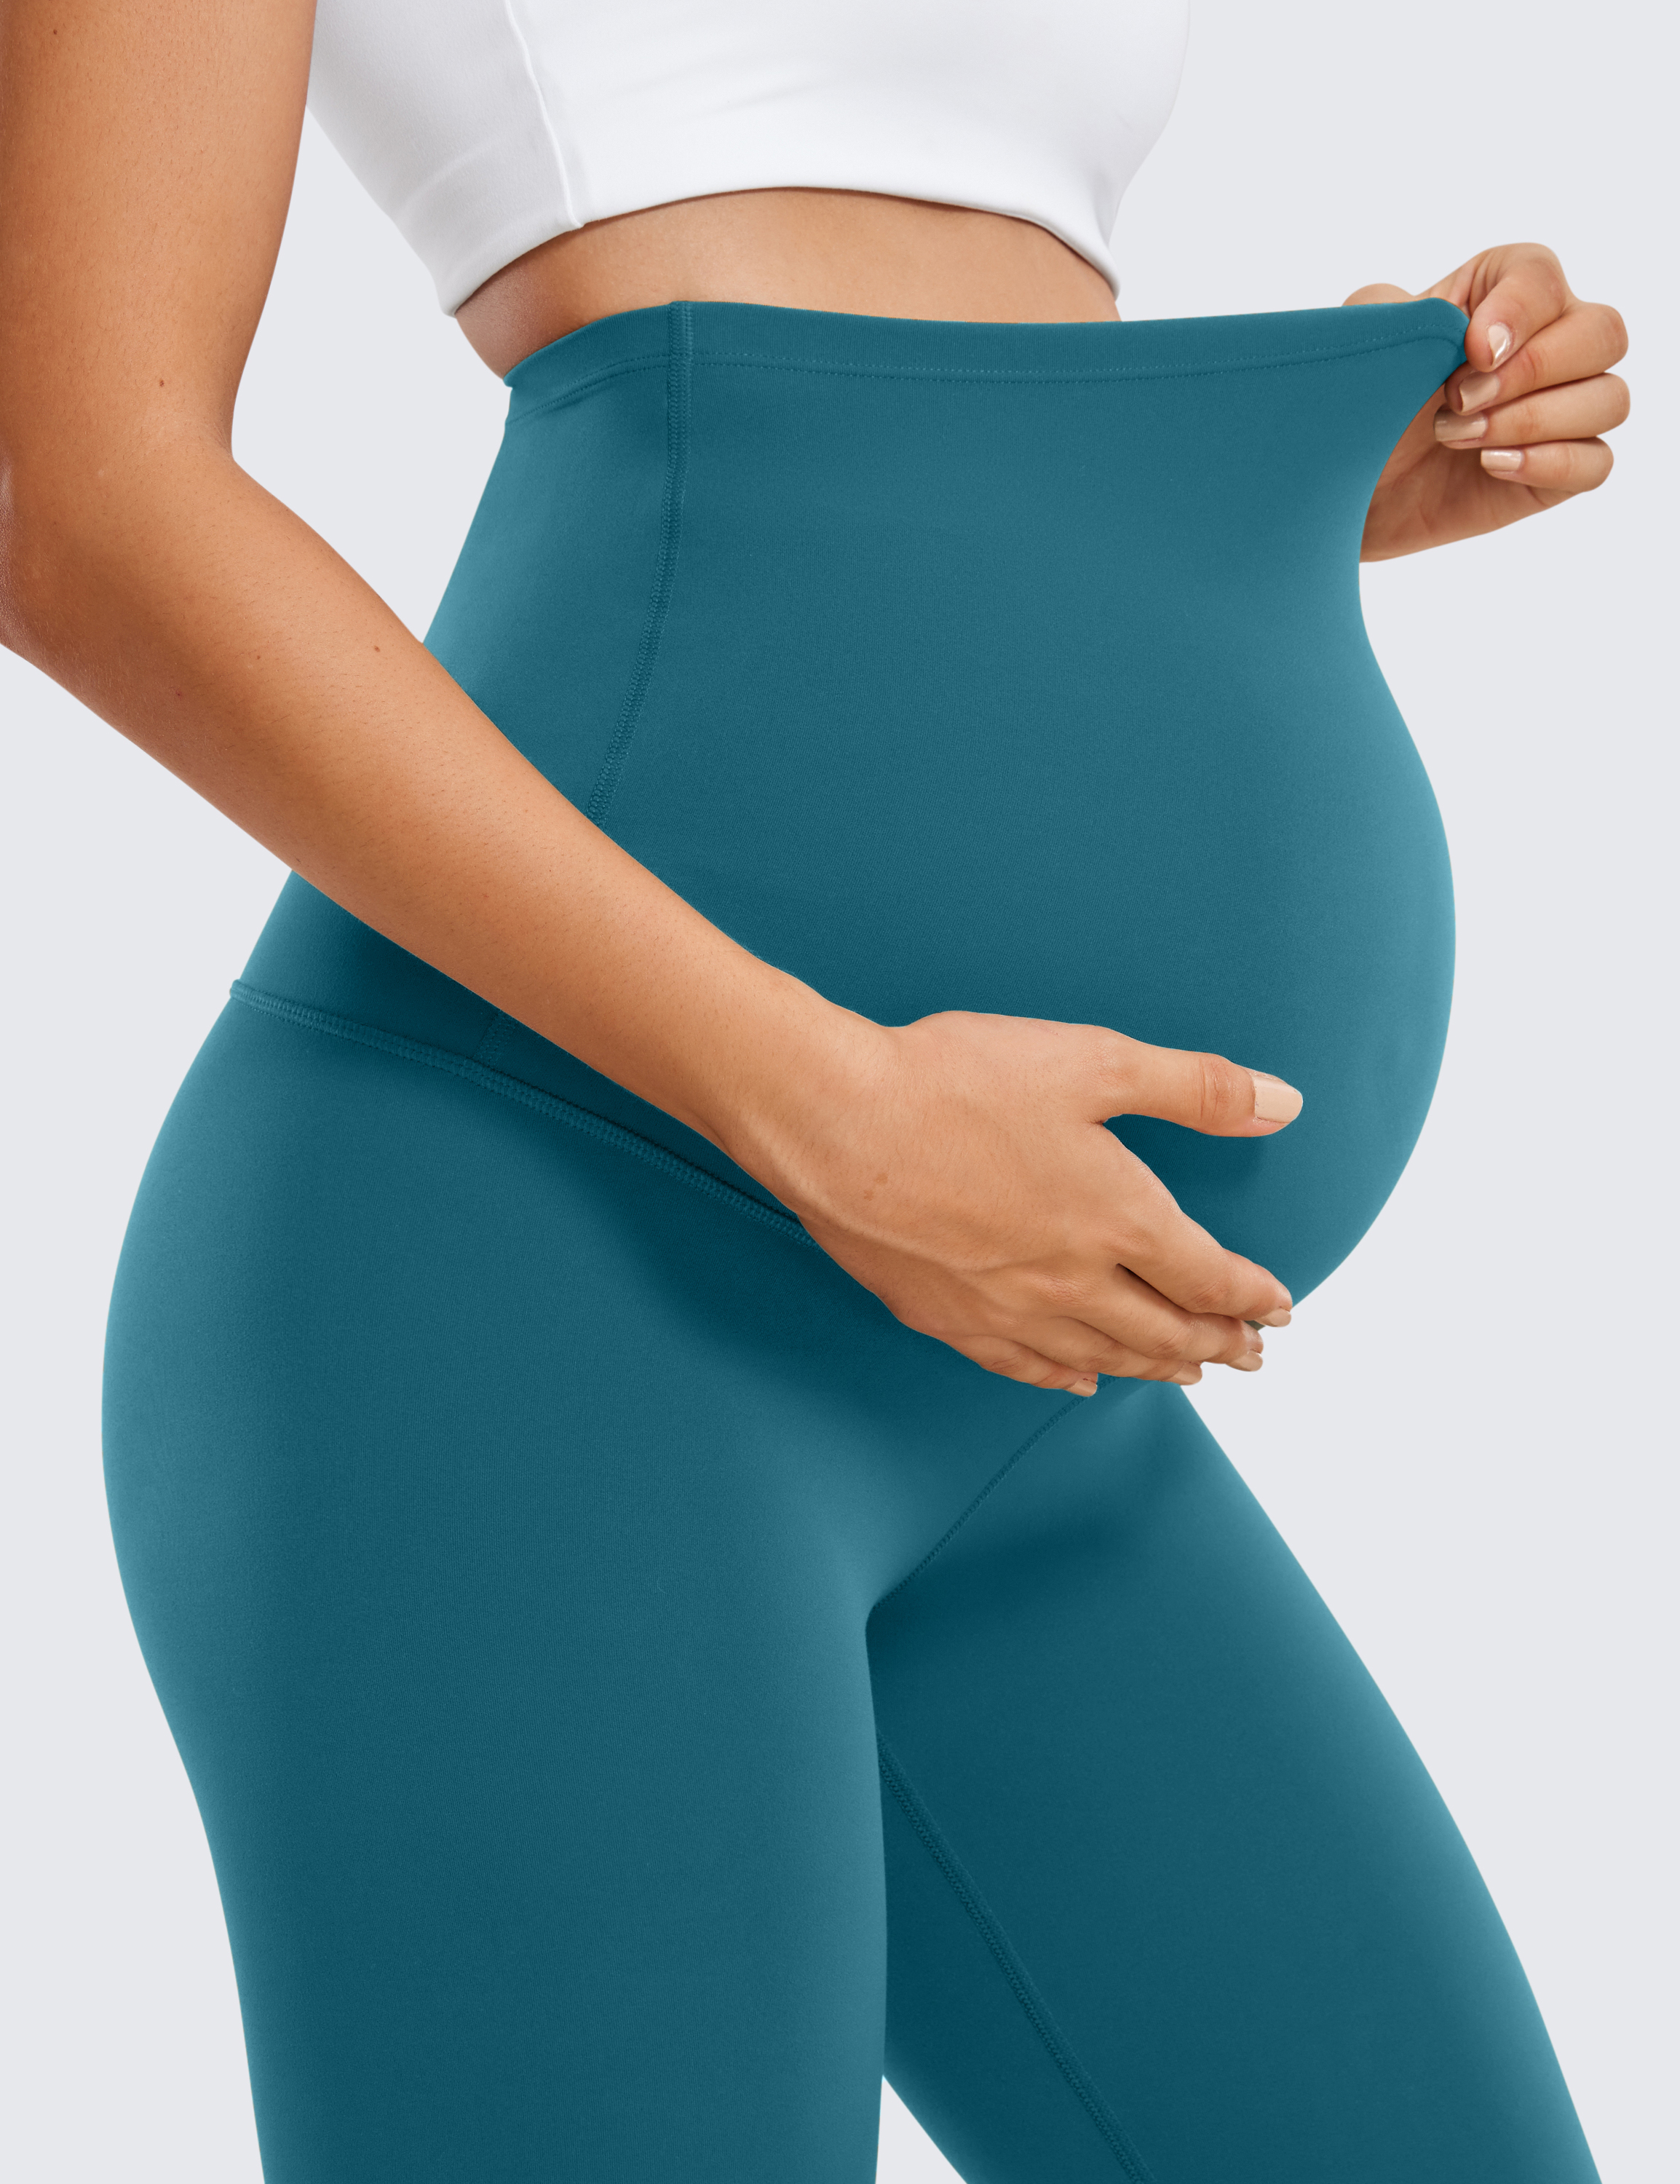 CRZ YOGA Butterluxe Maternity Leggings 25 inches Yoga Pants for Pregnancy